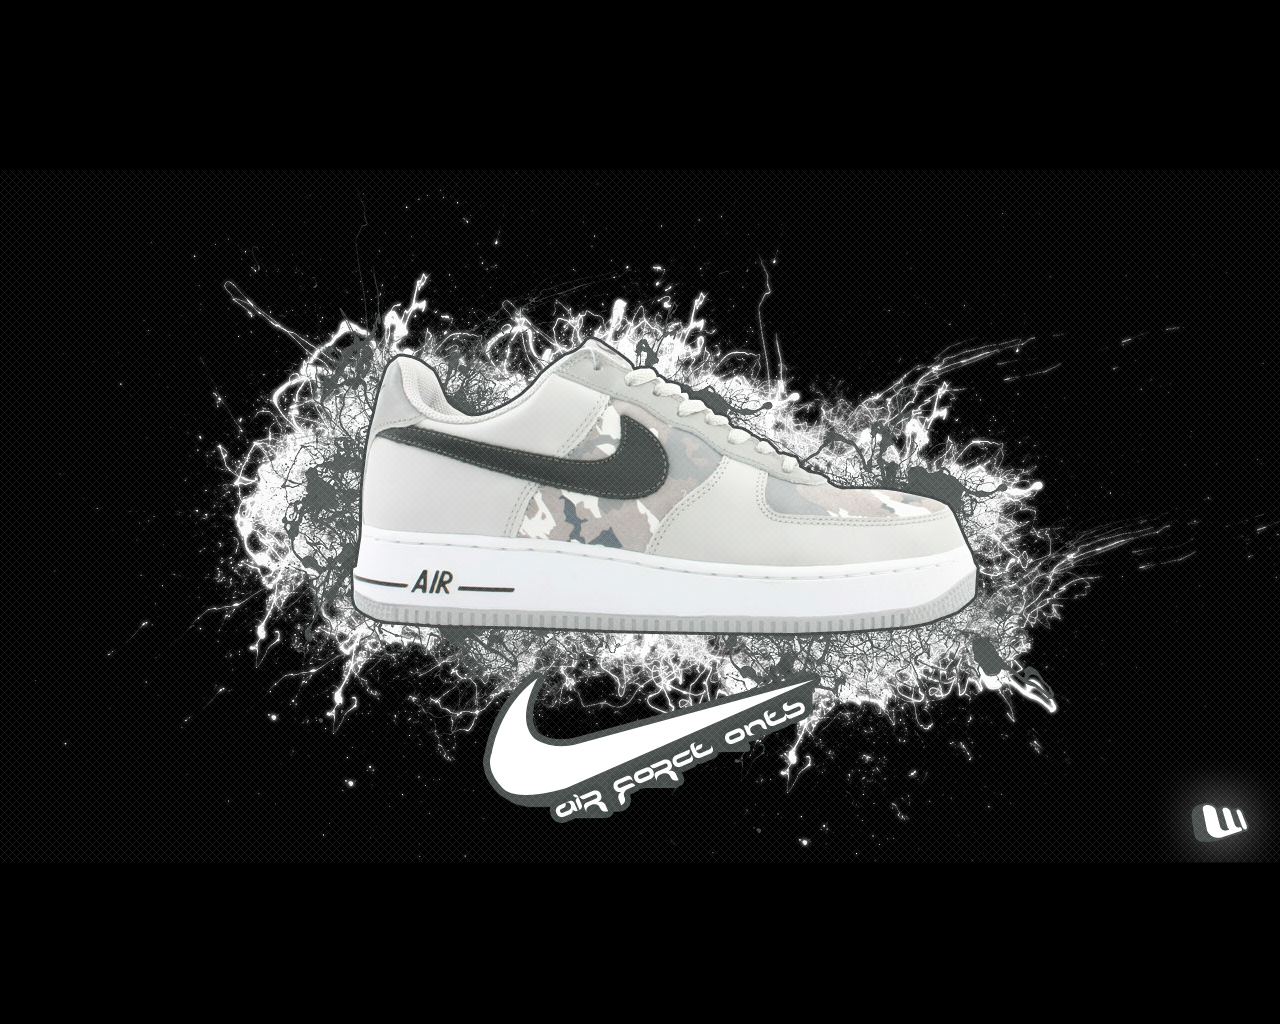 nike air force one by icecream trillaking fan art wallpaper other 2008